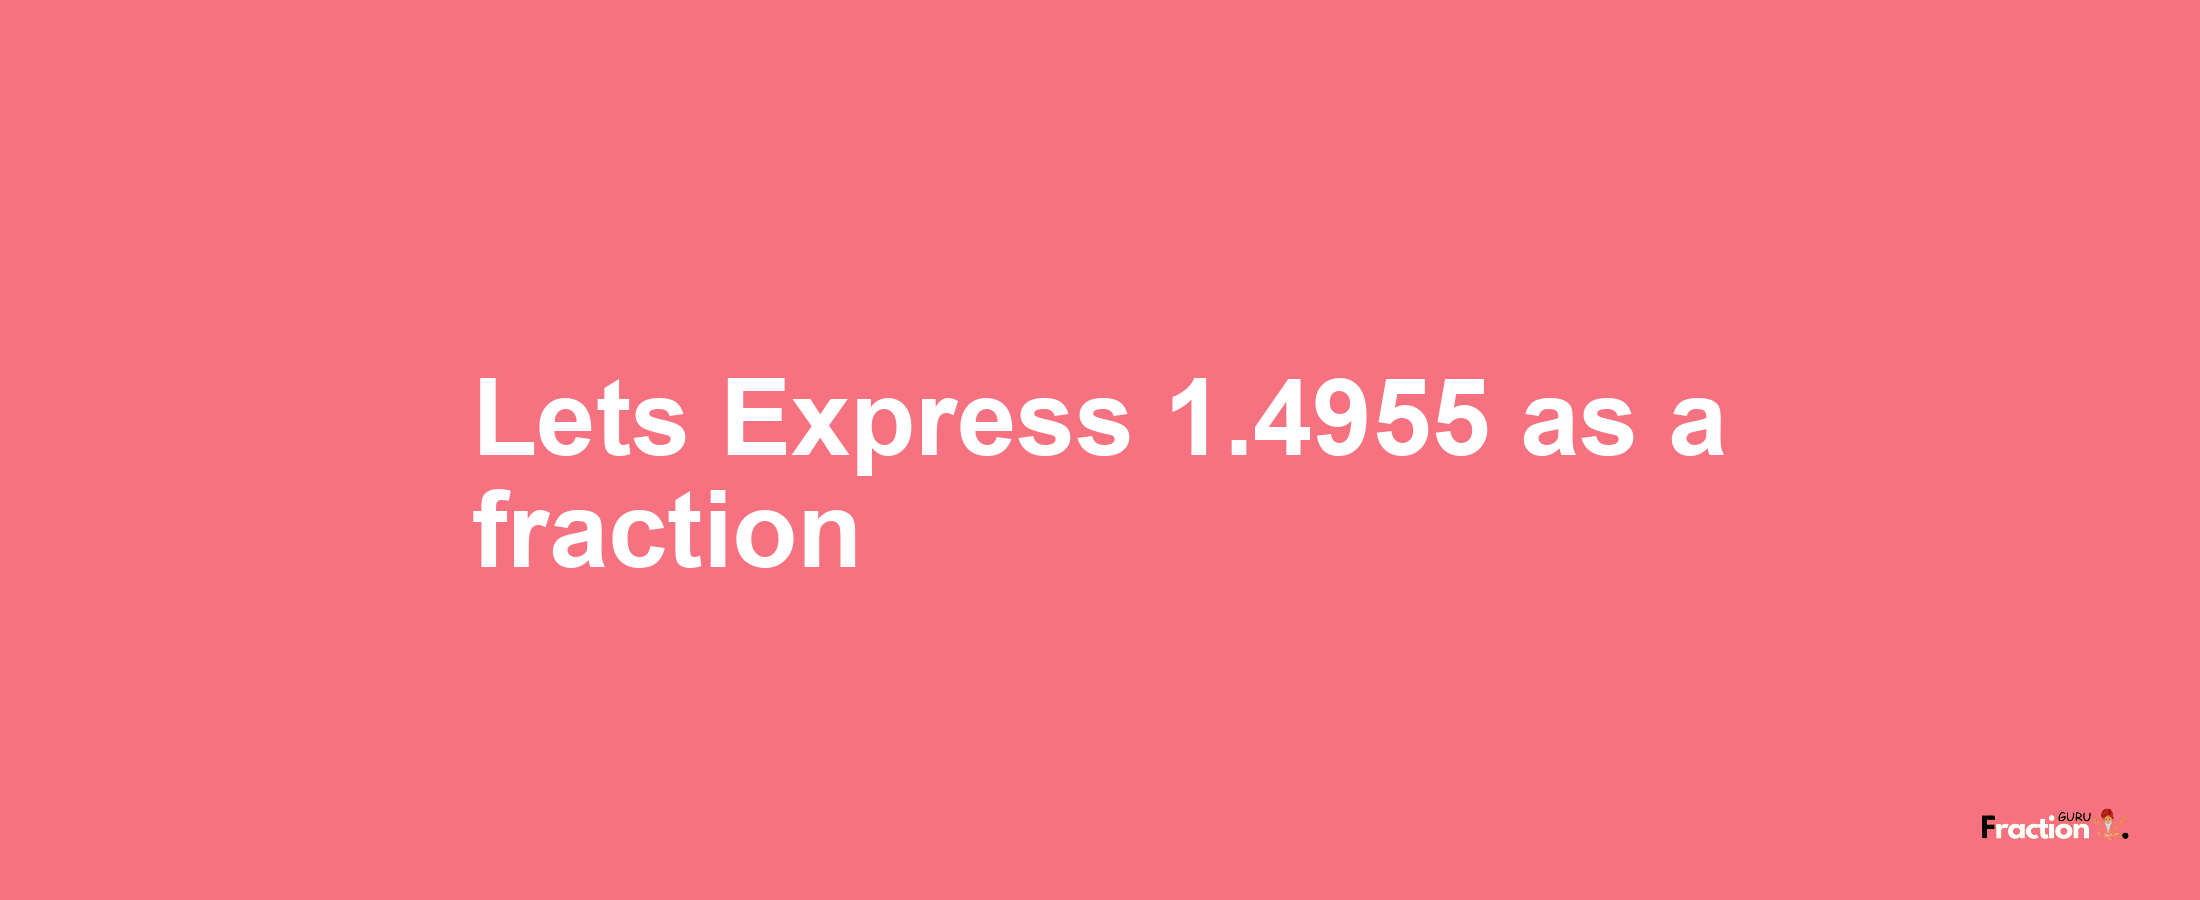 Lets Express 1.4955 as afraction